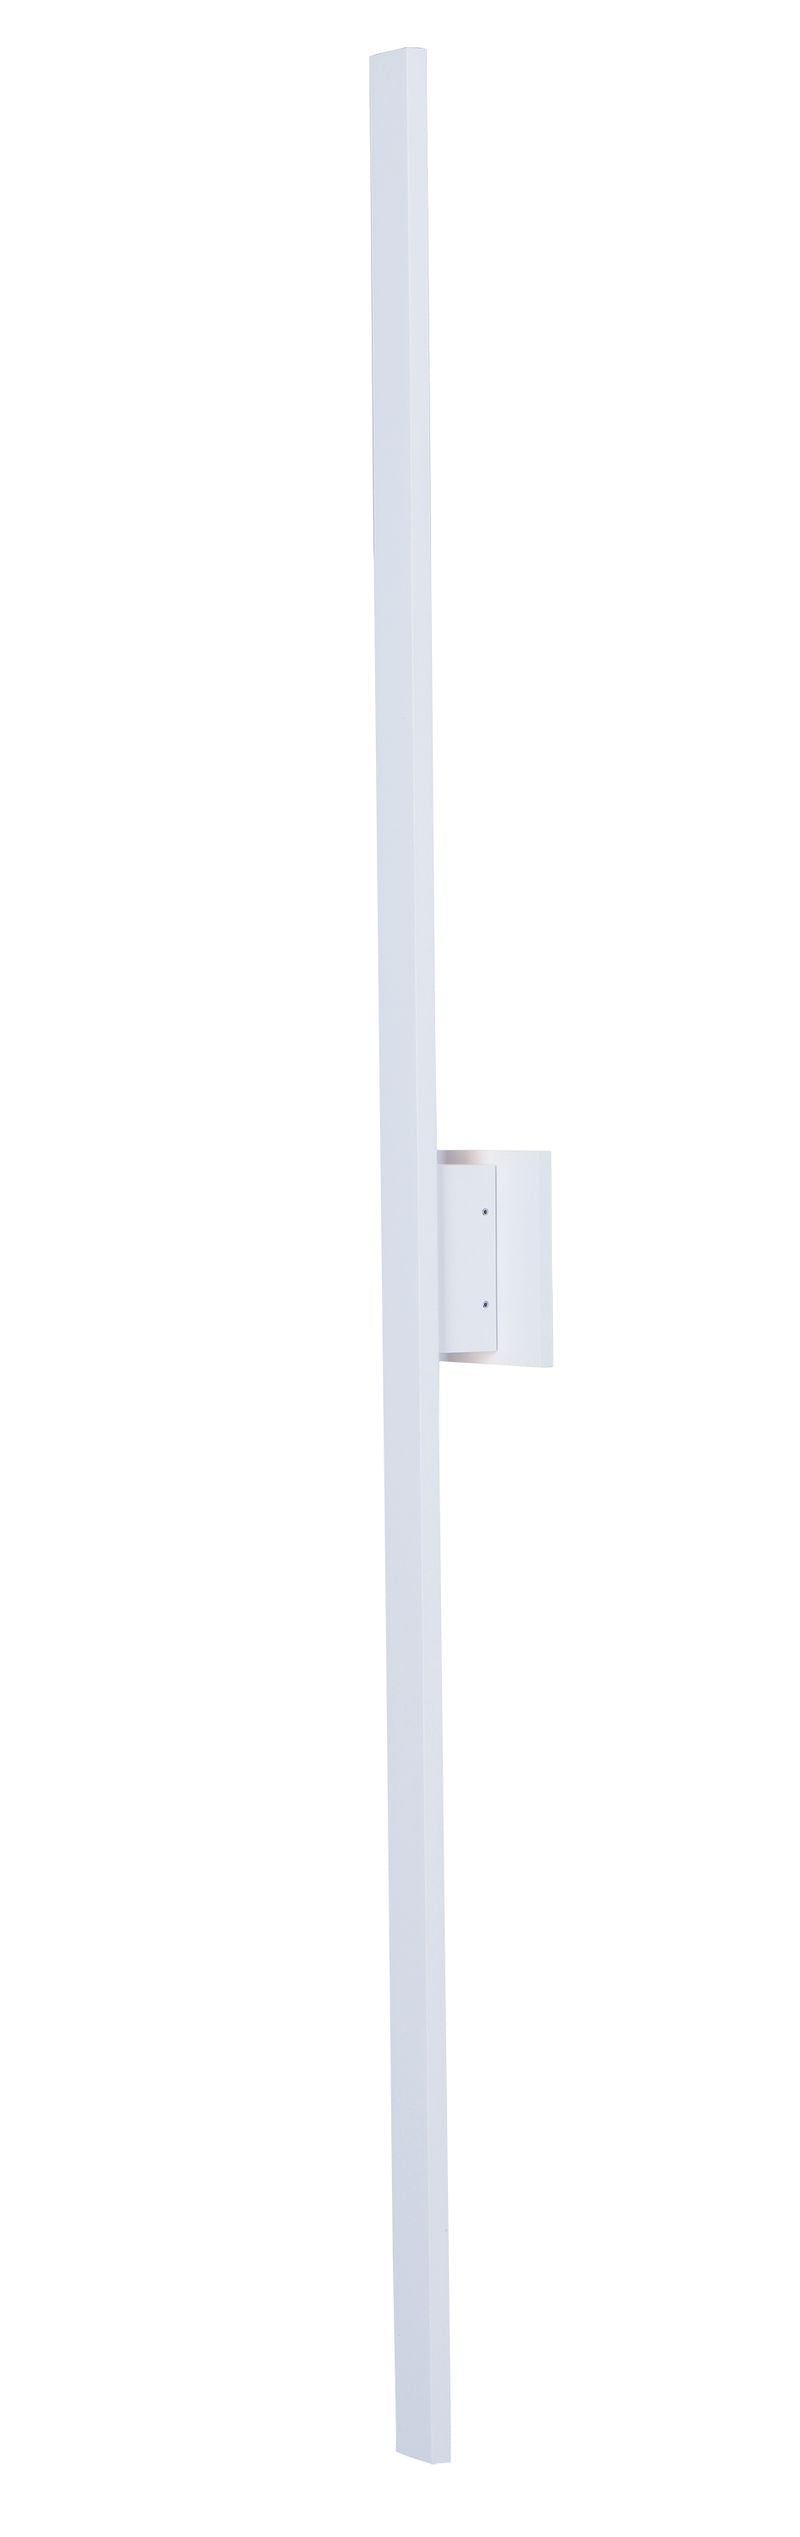 Alumilux Sconce 51' 2 Light Outdoor Wall Mount in White